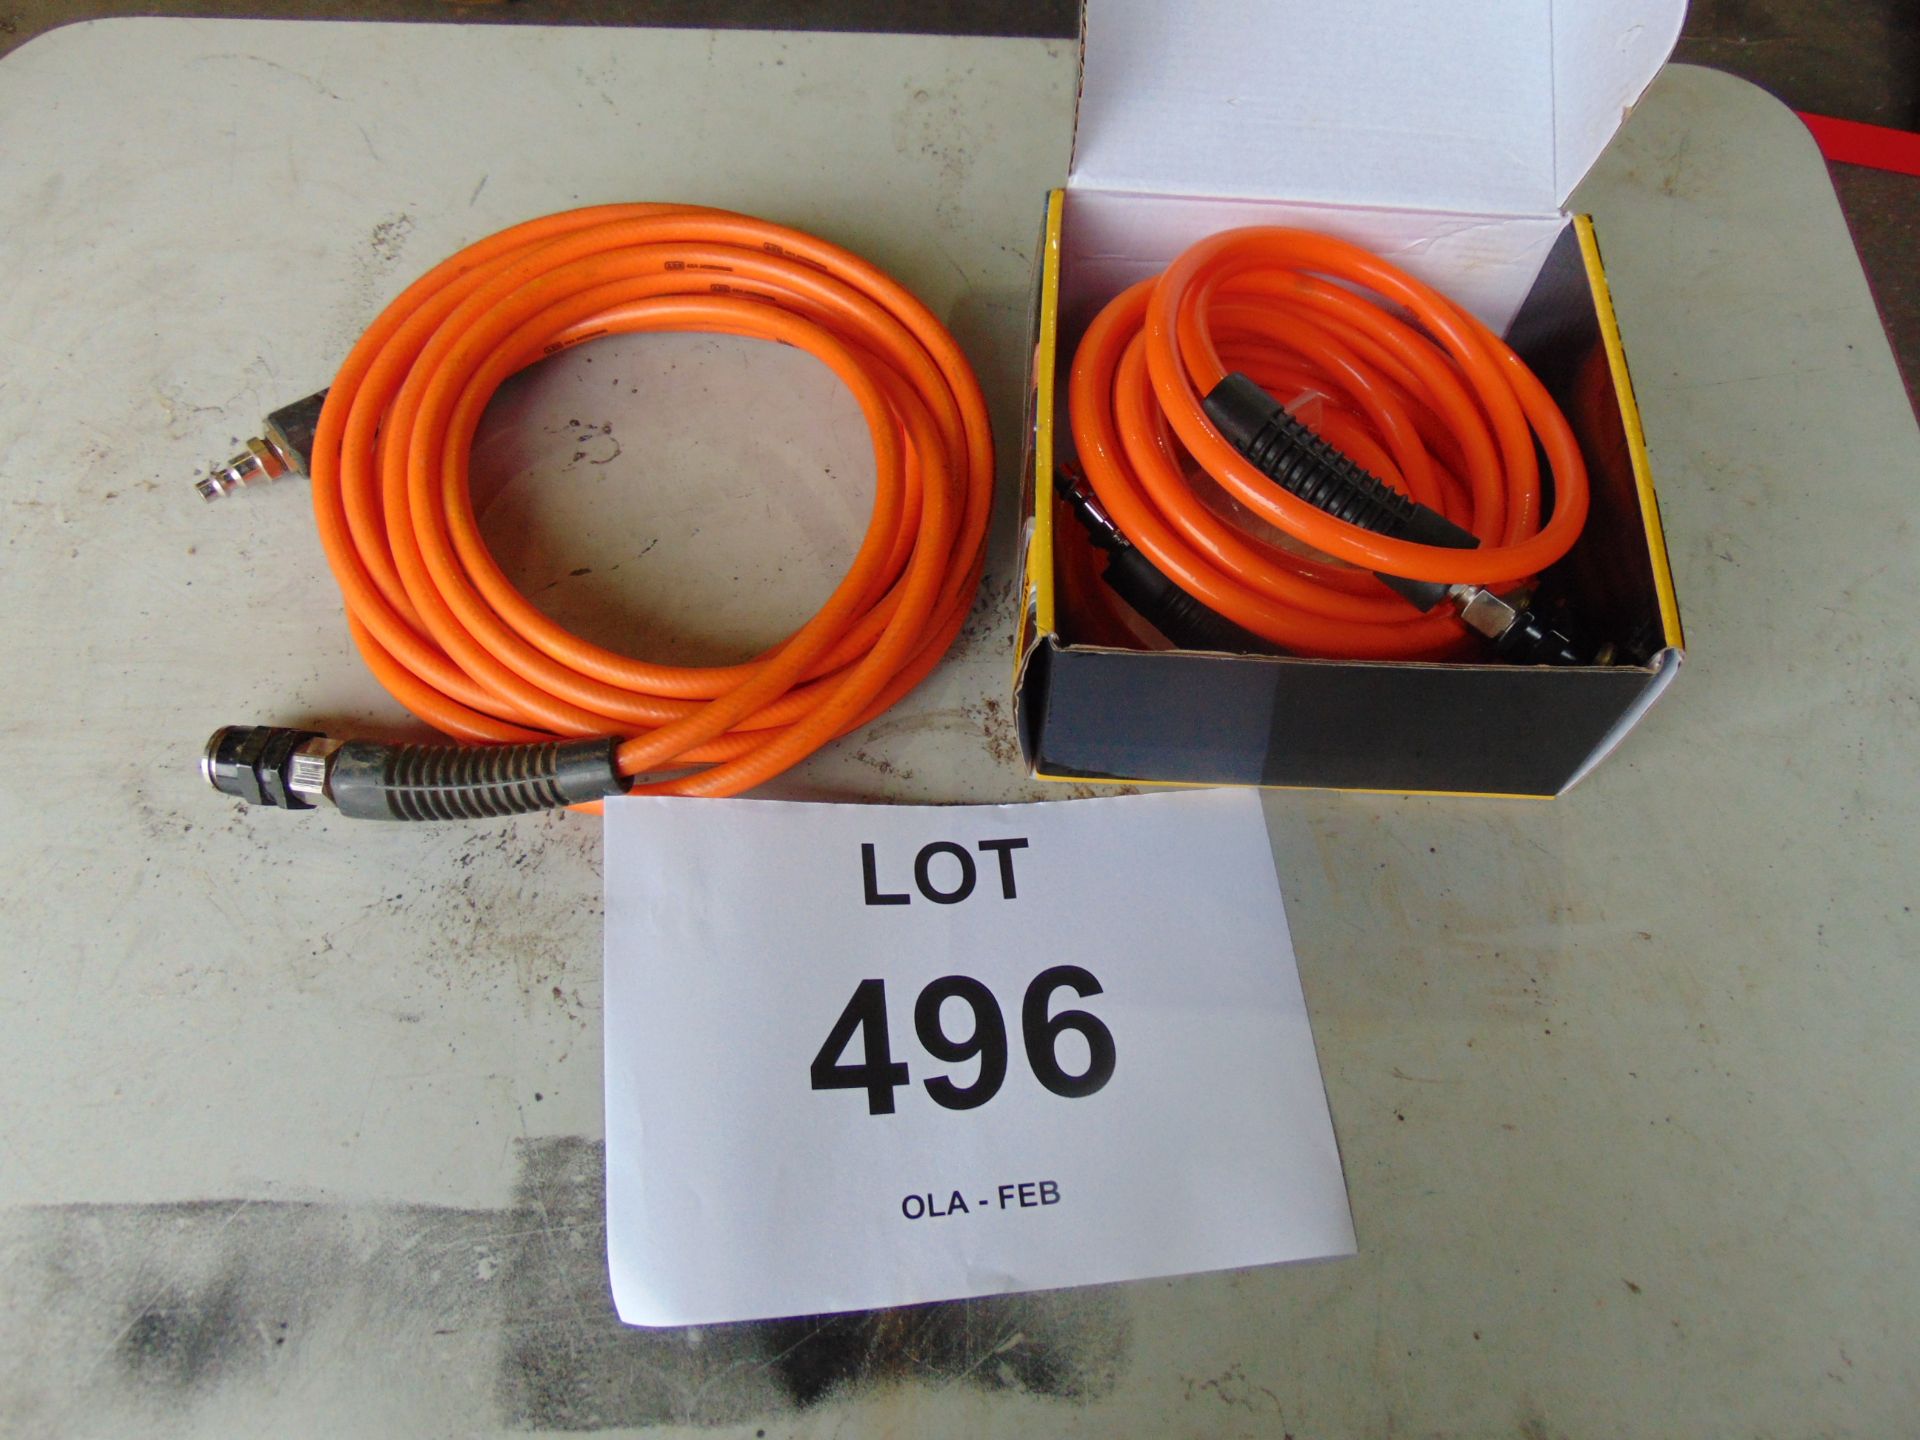 2X UNISSUED ARP COMPRESSOR AIR LINES 20 FT LONG